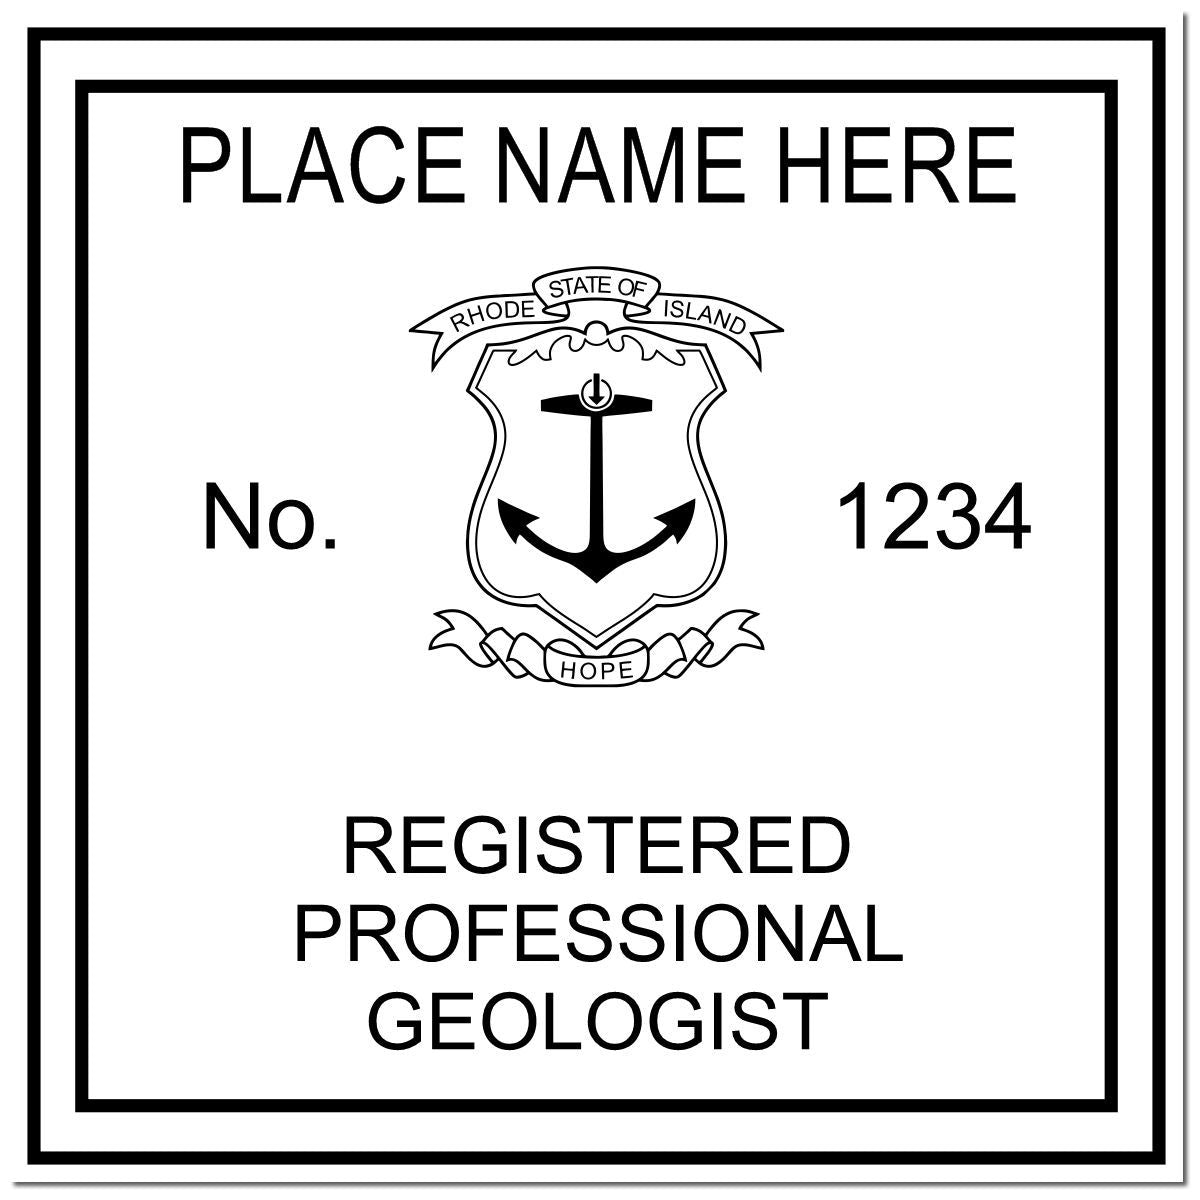 This paper is stamped with a sample imprint of the Slim Pre-Inked Rhode Island Professional Geologist Seal Stamp, signifying its quality and reliability.